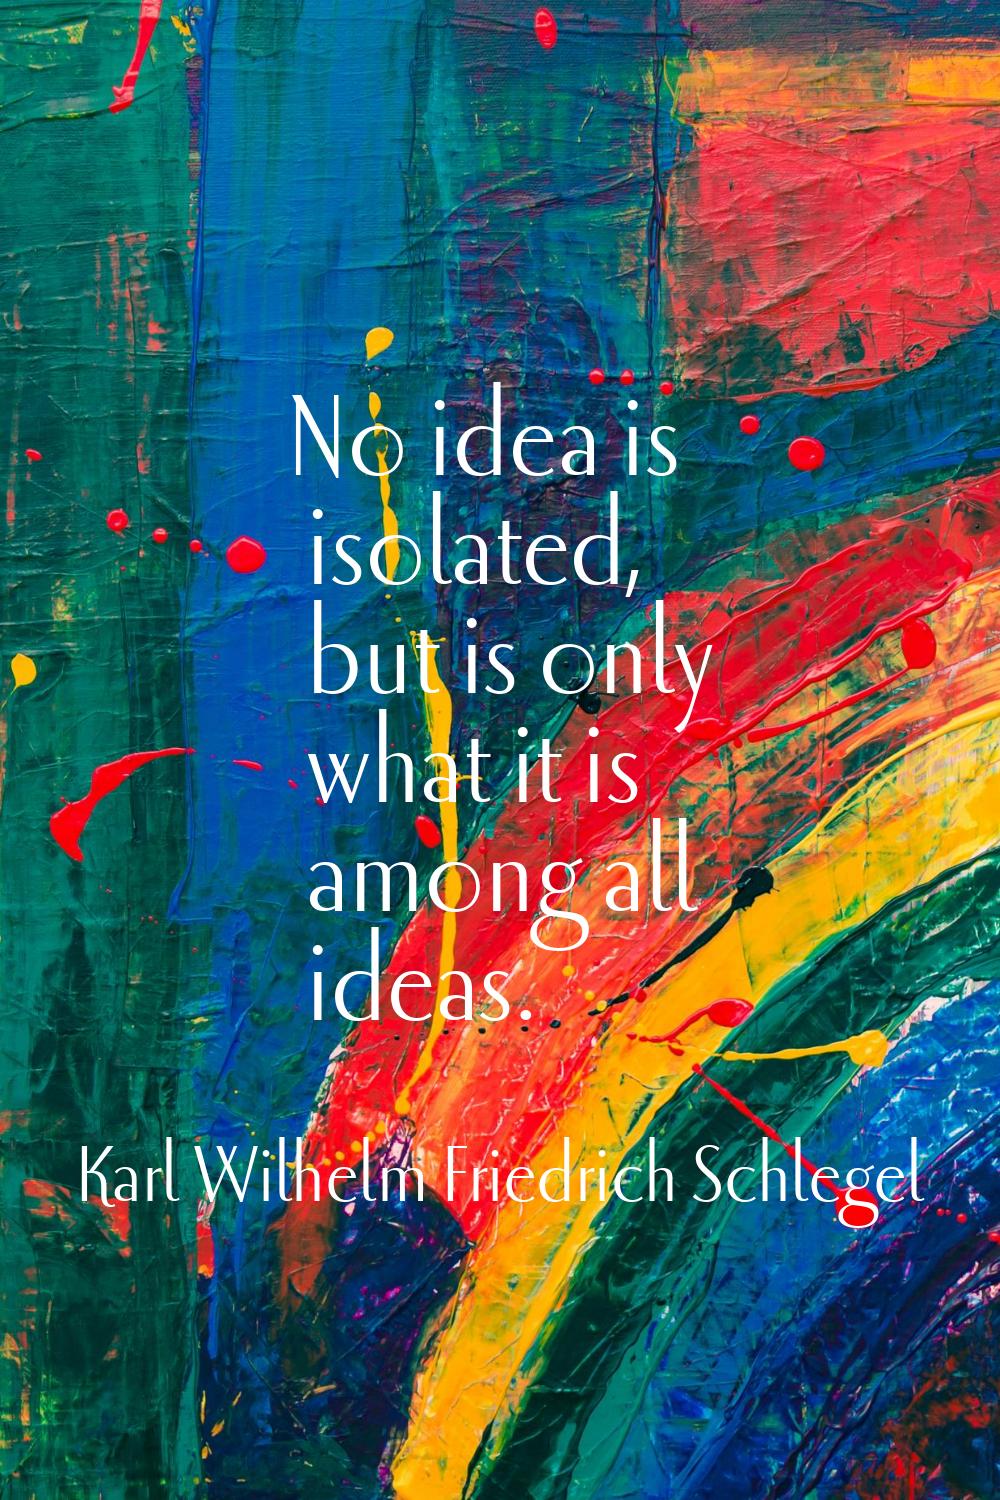 No idea is isolated, but is only what it is among all ideas.